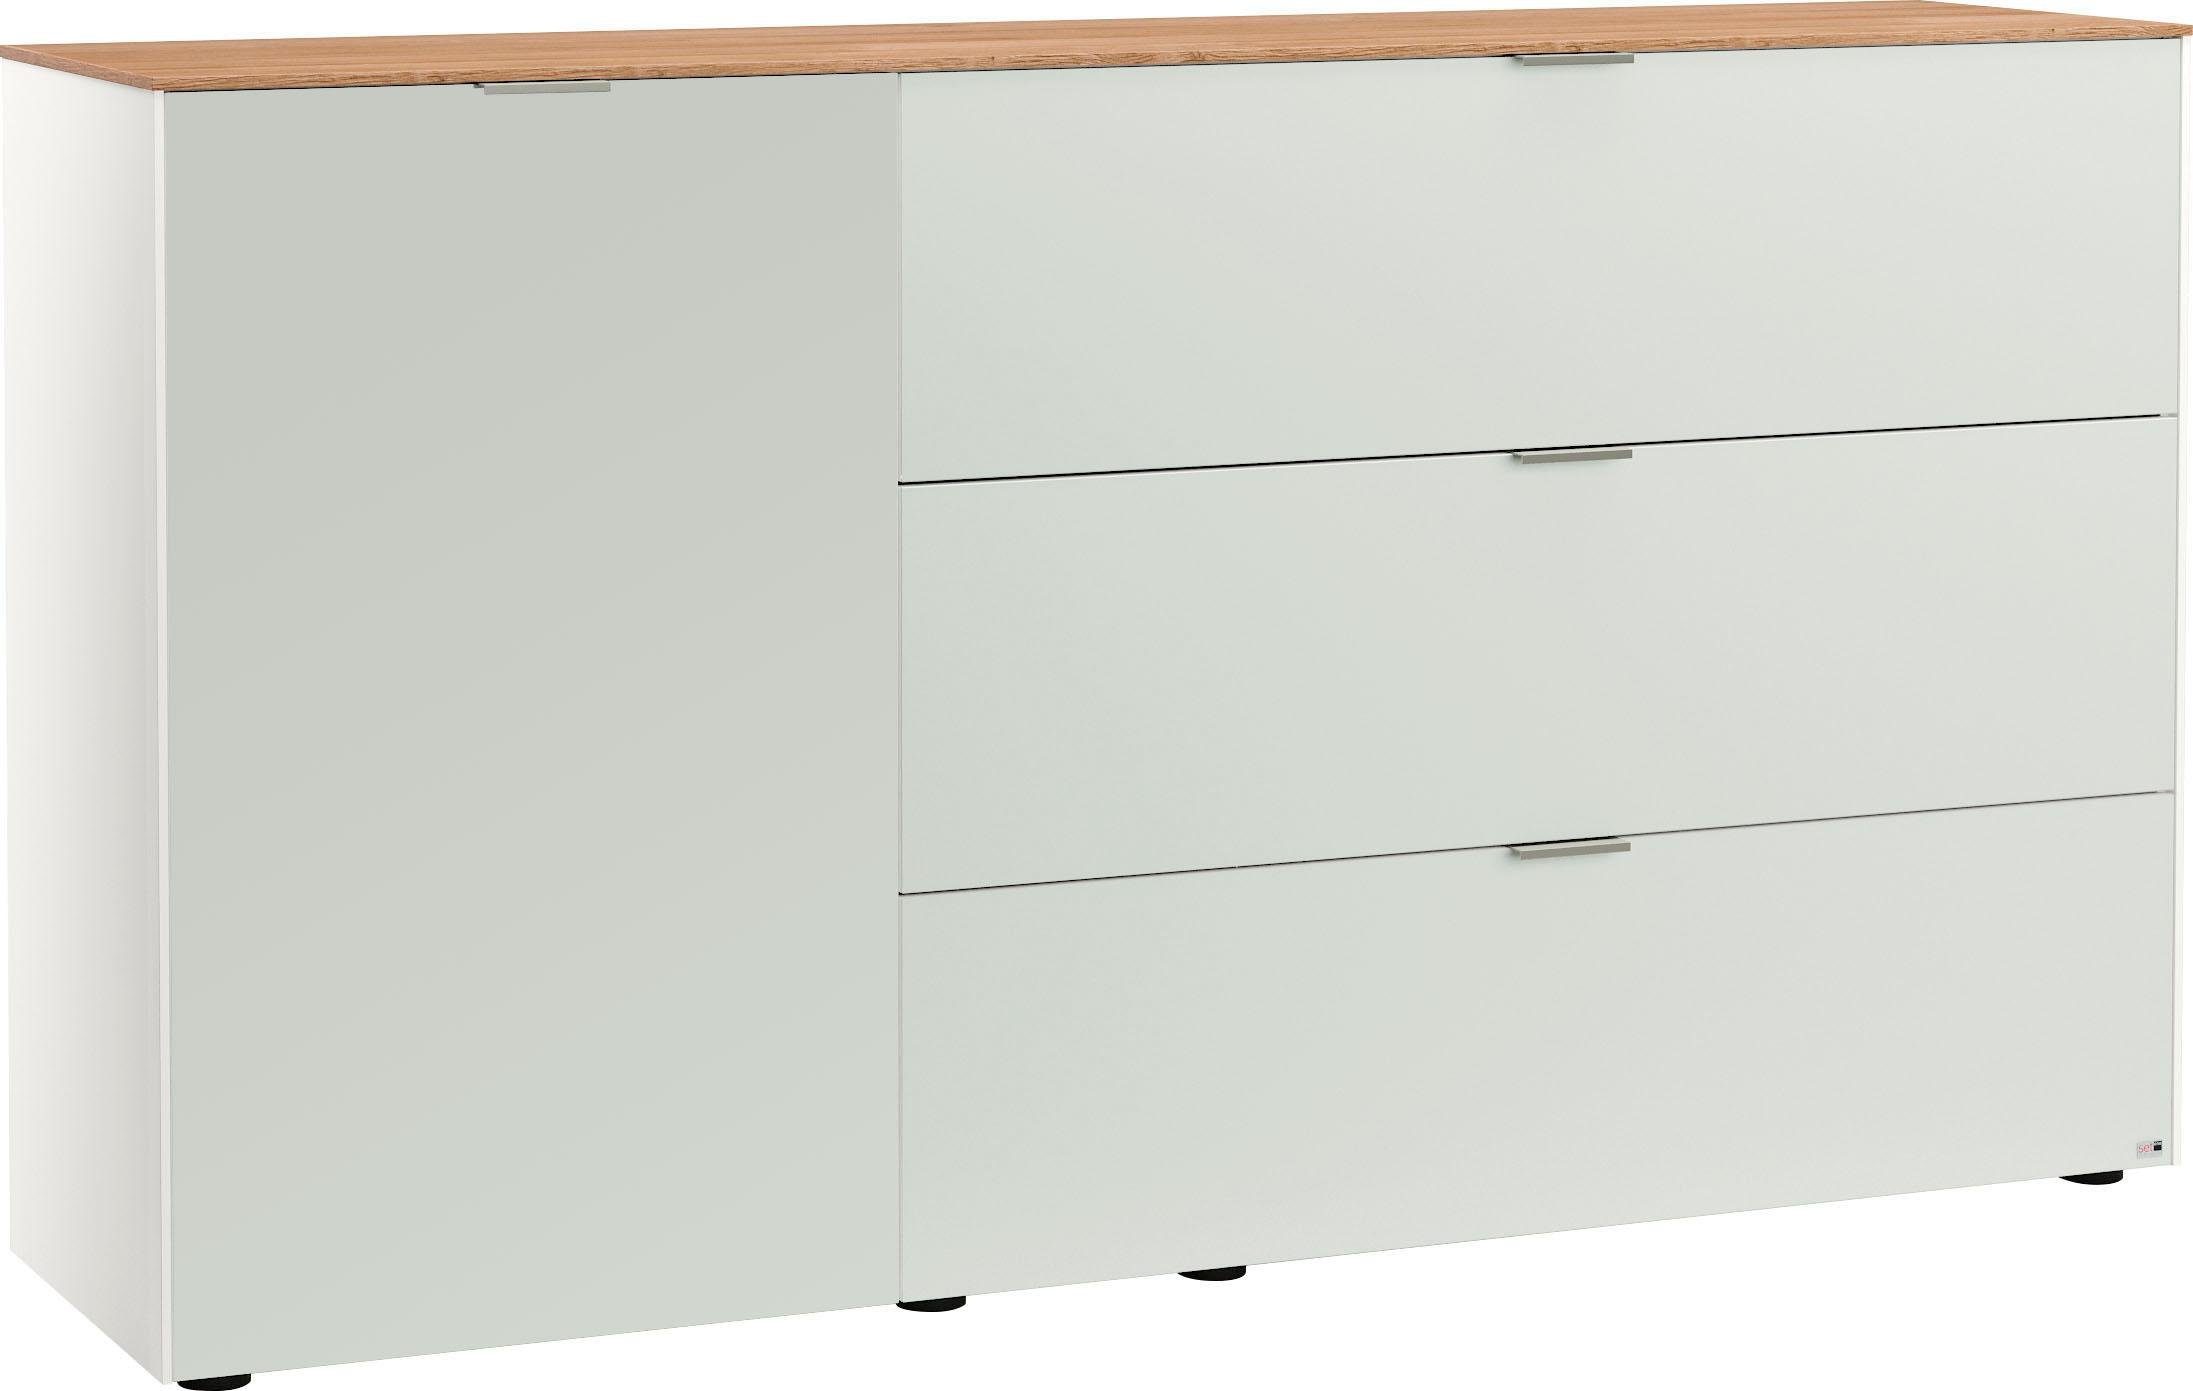 set one by Musterring Sideboard »Chicago« kaufen | OTTO